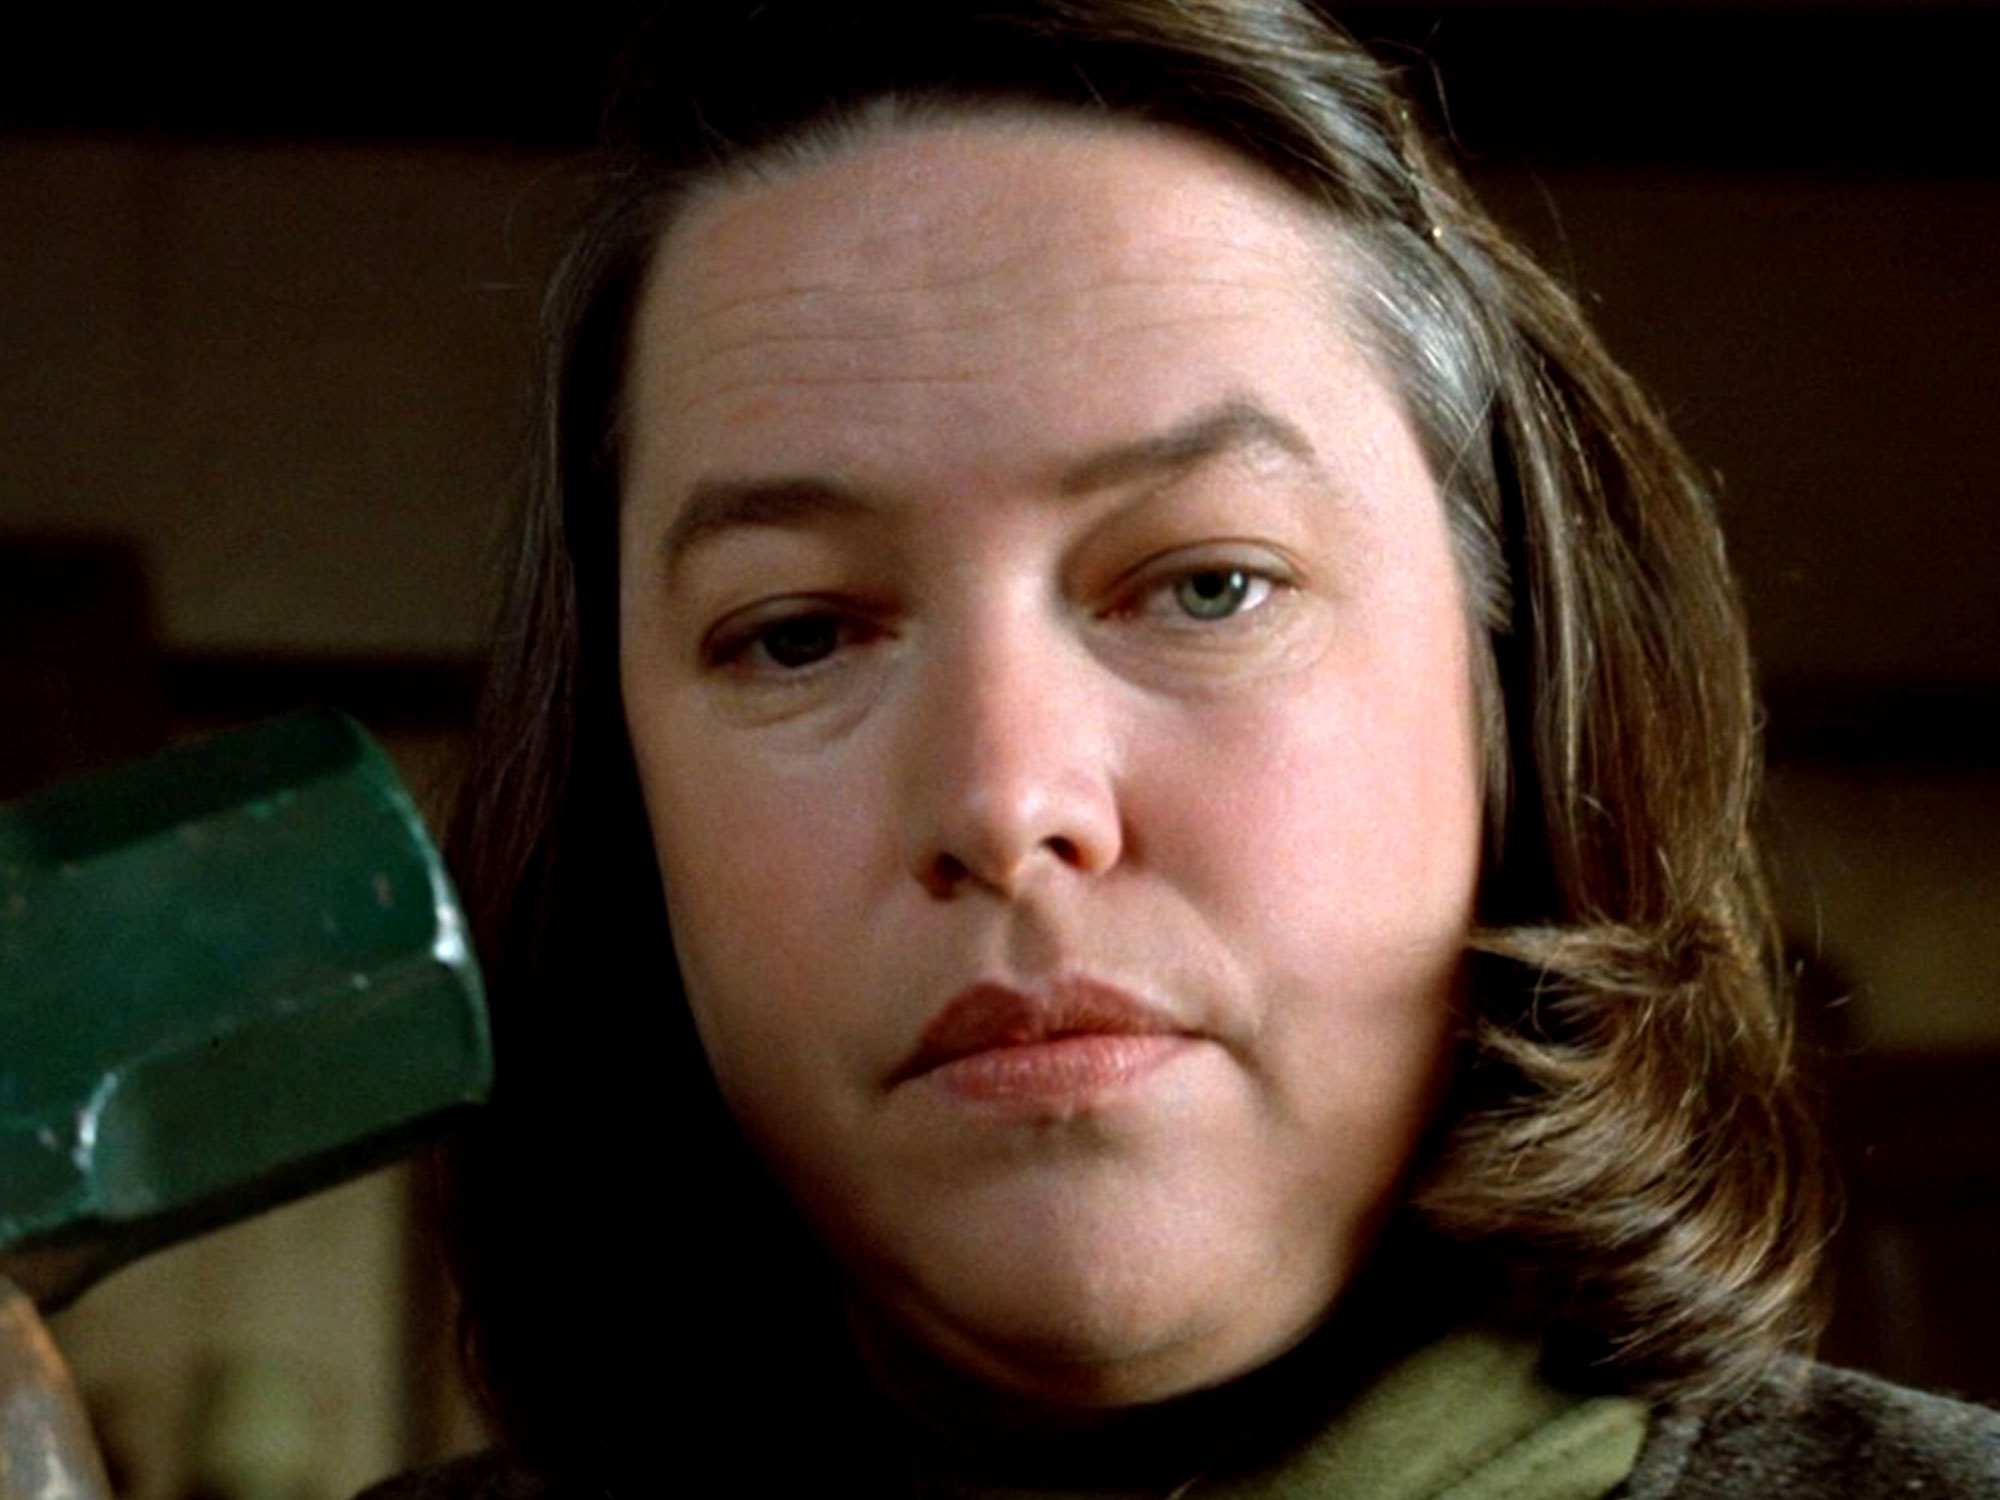 Why I love Kathy Bates’ performance in Misery